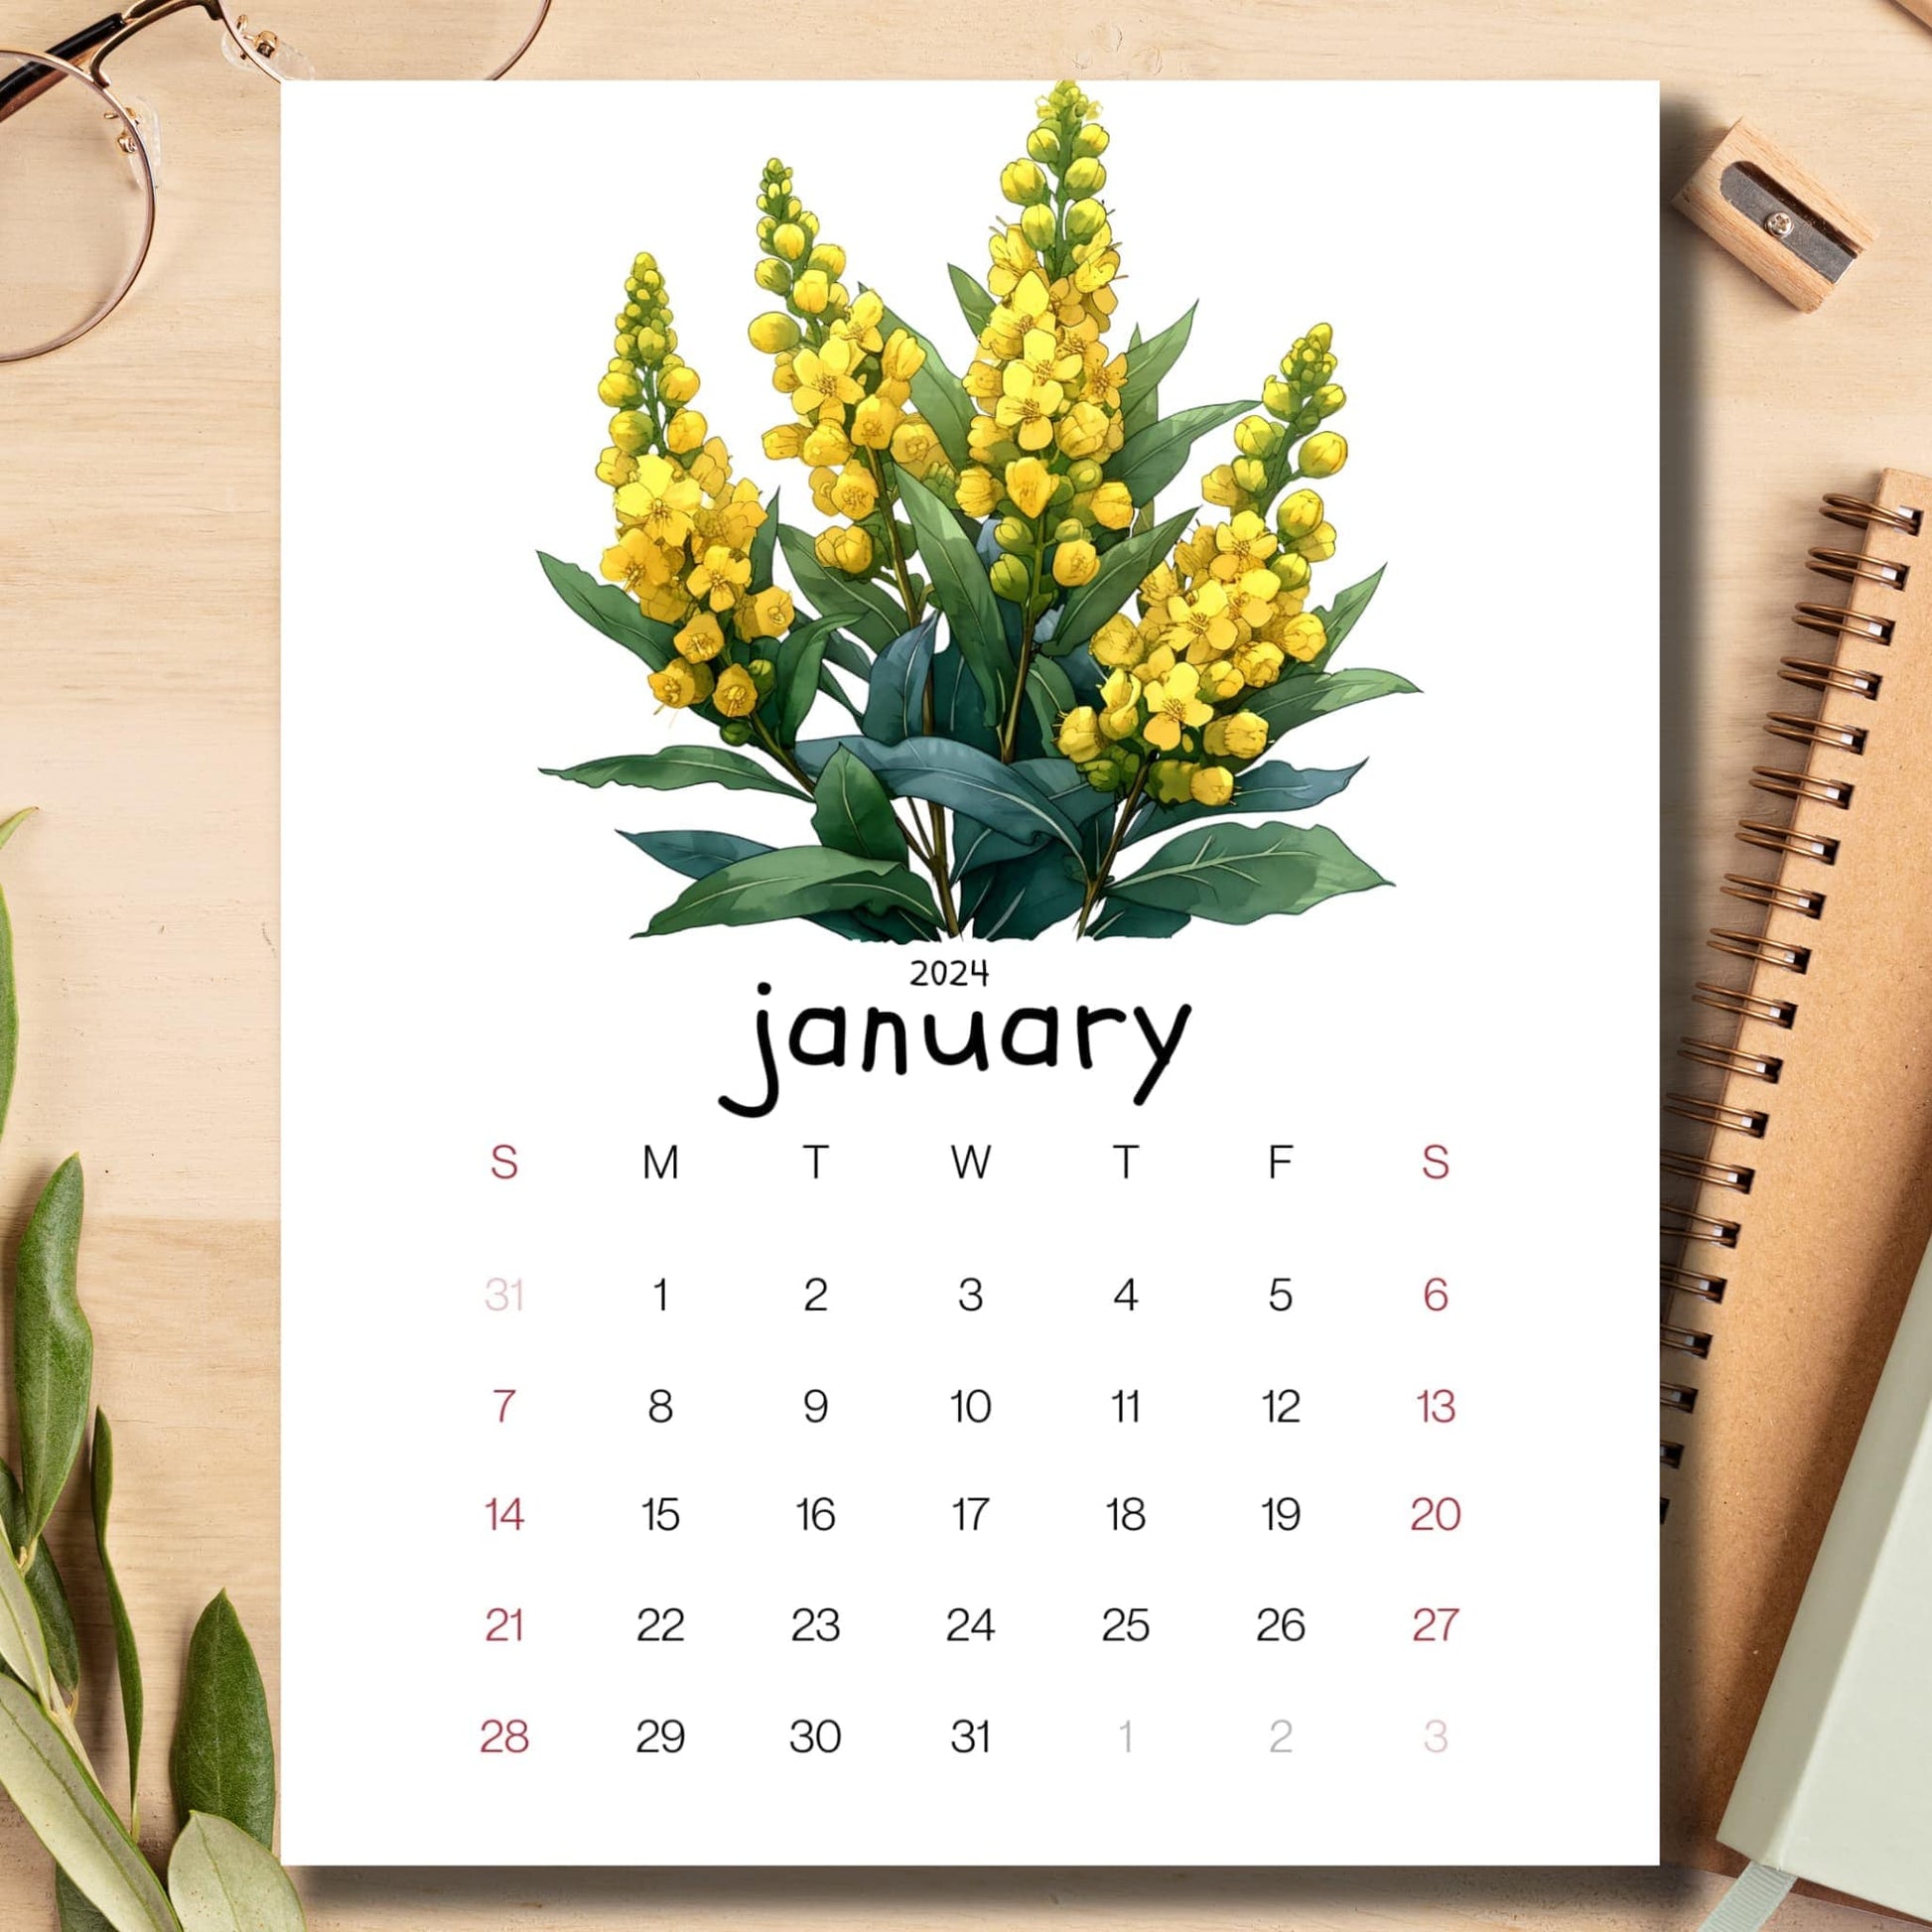 Mahonia Magic January 2024 calendar displayed on a light brown wooden desk with school supplies like a notebook, pencil, and sharpener.